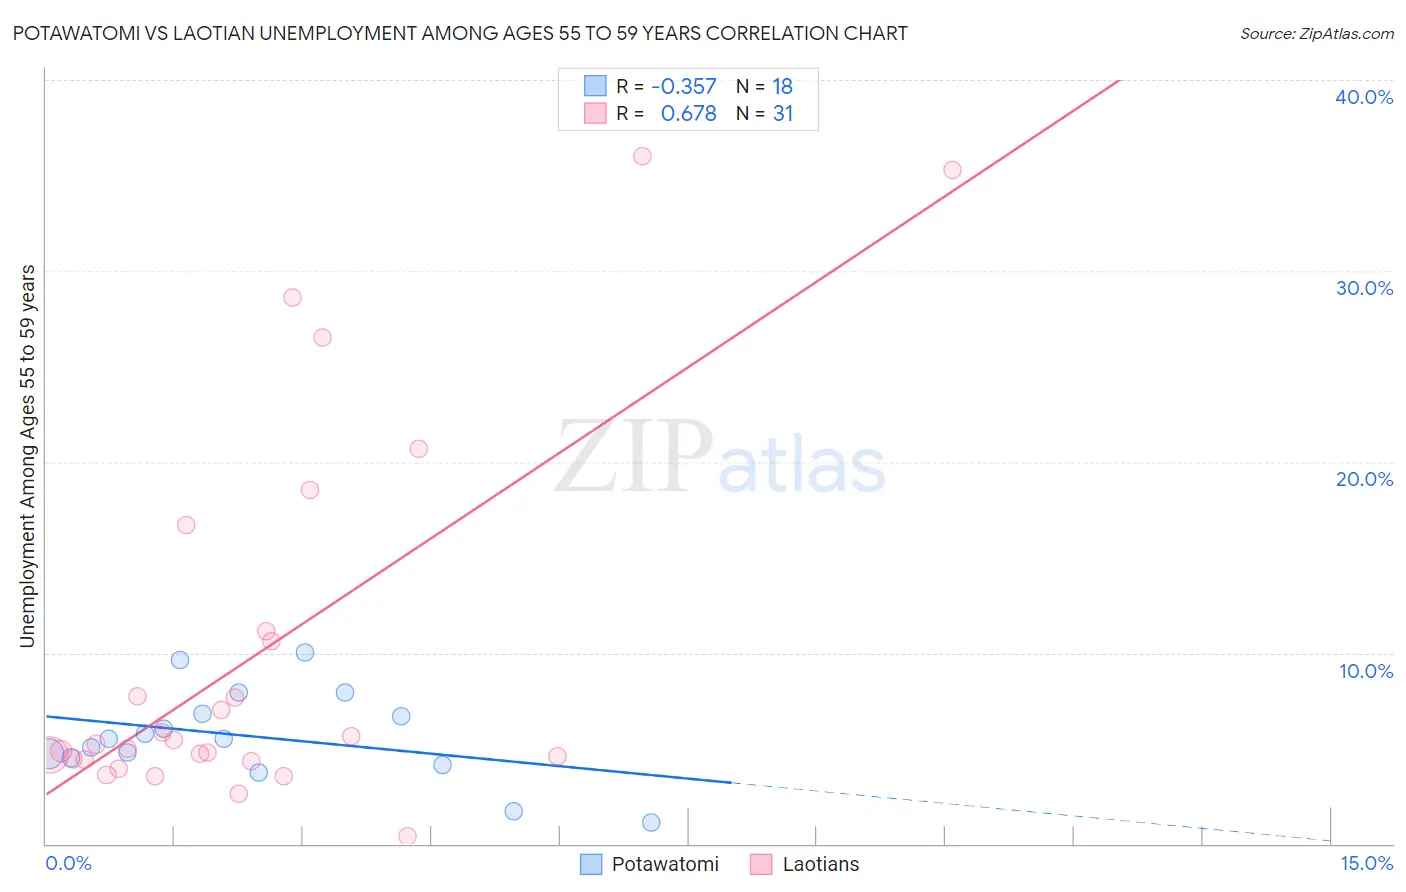 Potawatomi vs Laotian Unemployment Among Ages 55 to 59 years